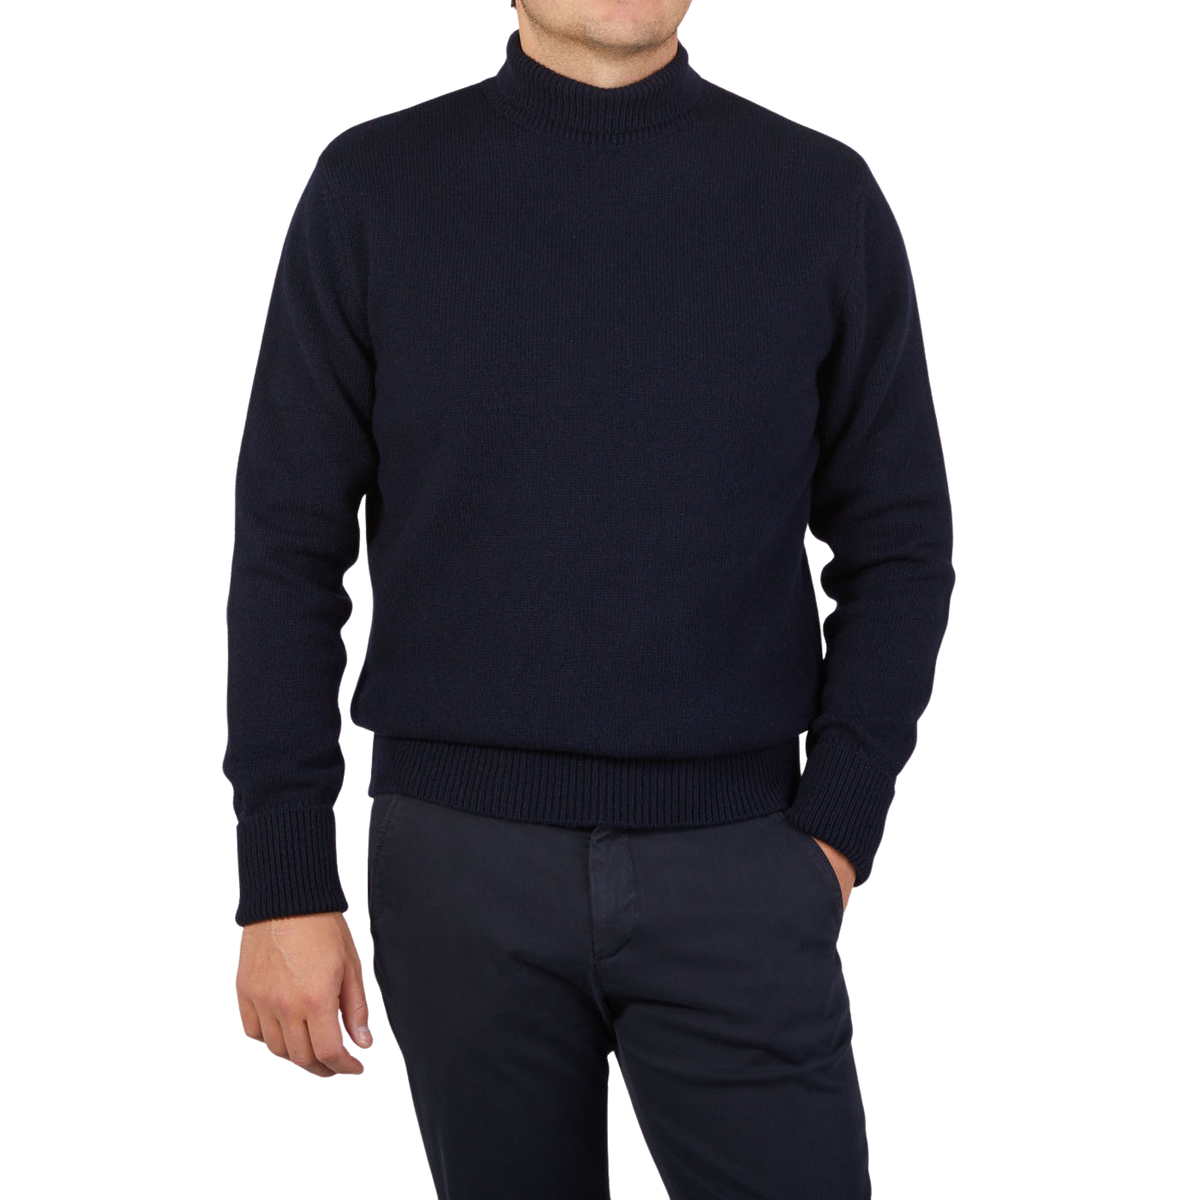 G.R.P Navy Blue Wool Cashmere Mock Neck Sweater Front